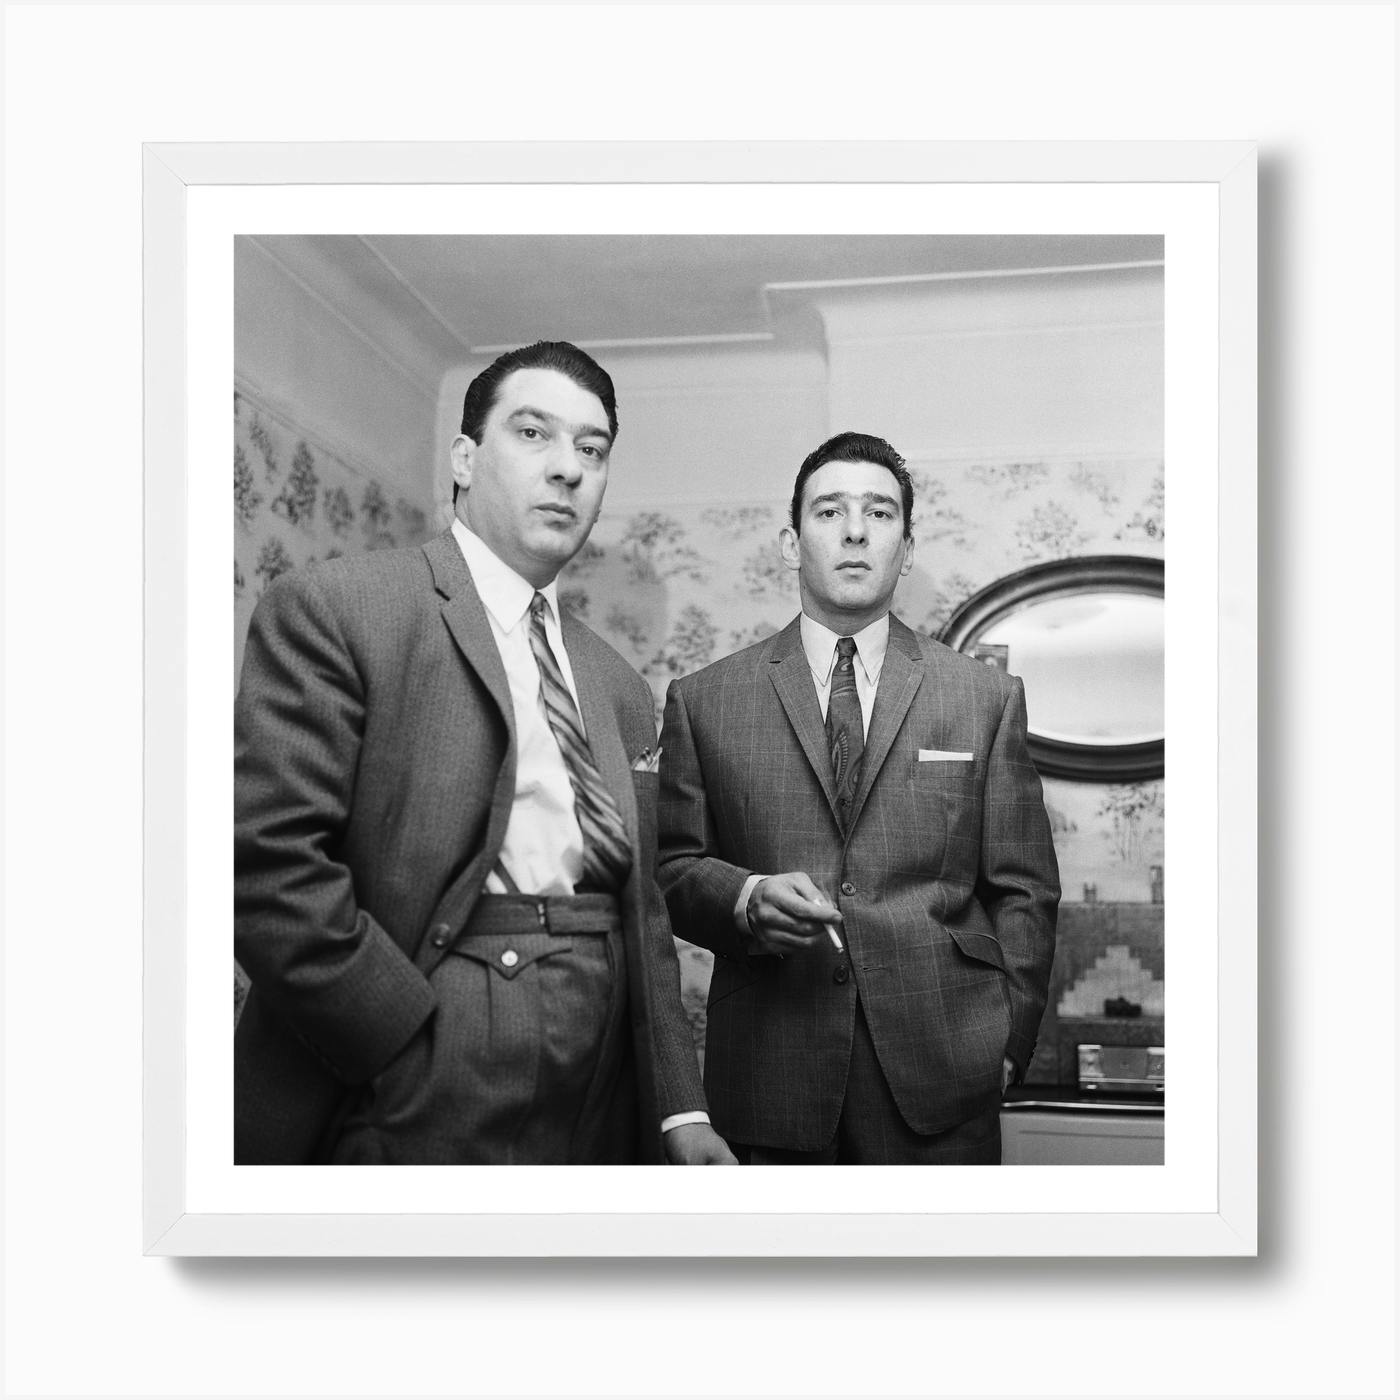 London Gangster The Kray Twins Picture Print on Framed Canvas Wall Art Decor 